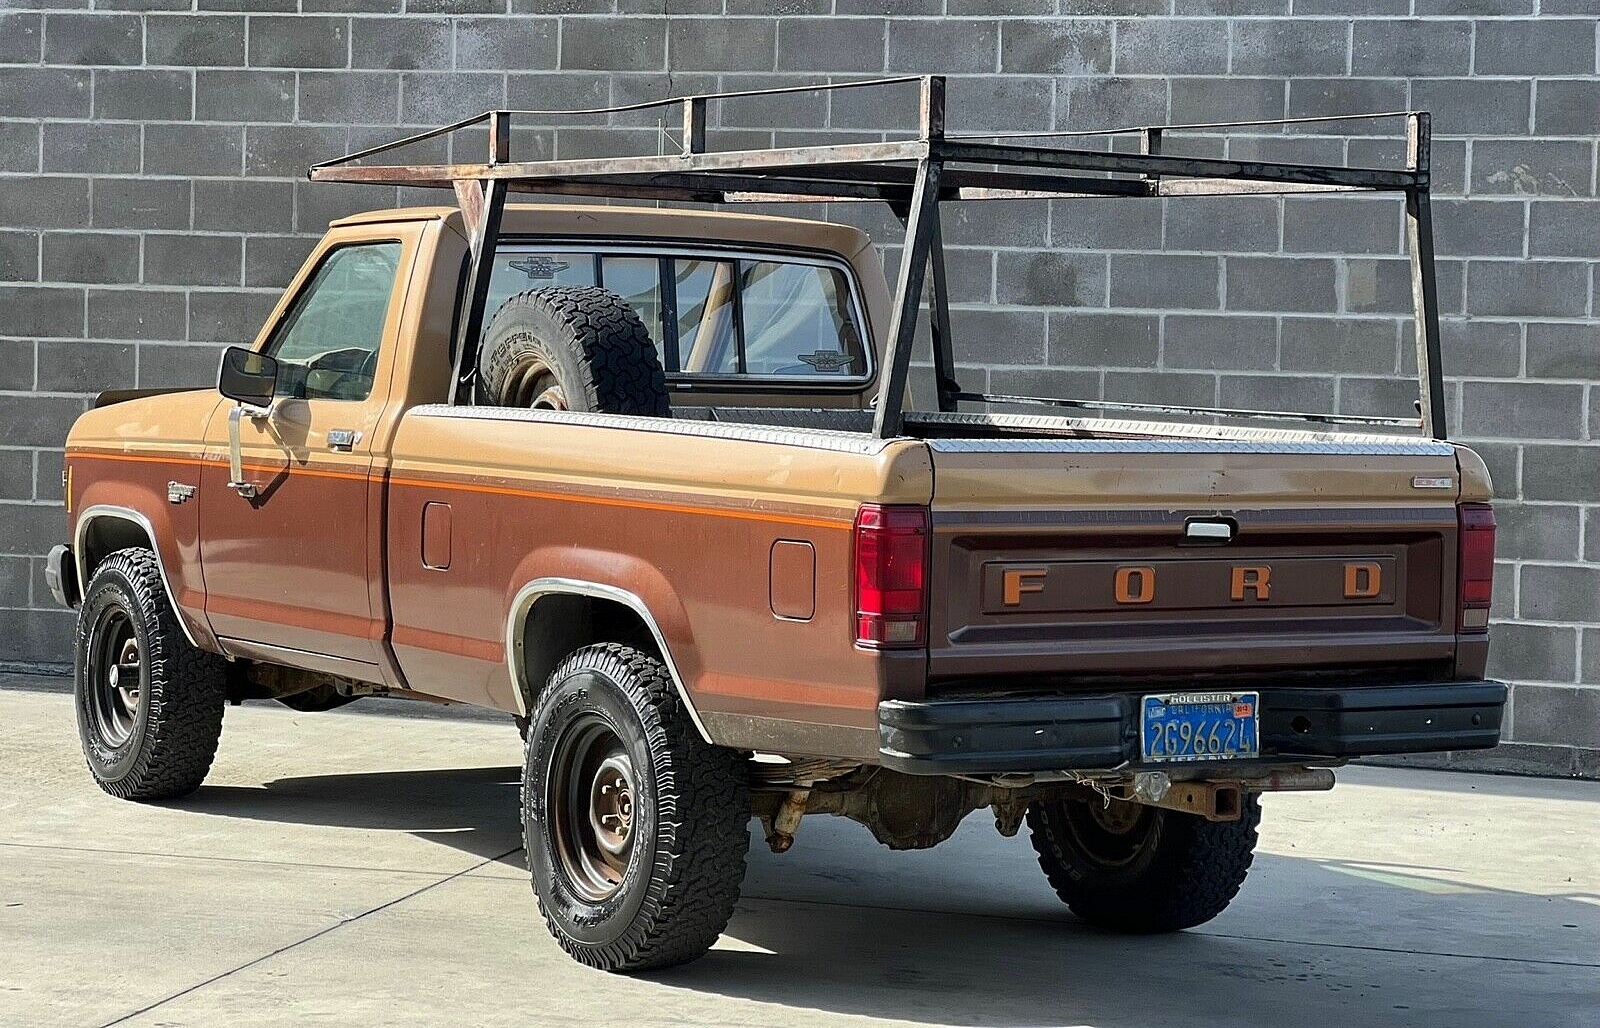 1983 Ford Ranger Is an Affordable Classic Ready for Work or Play